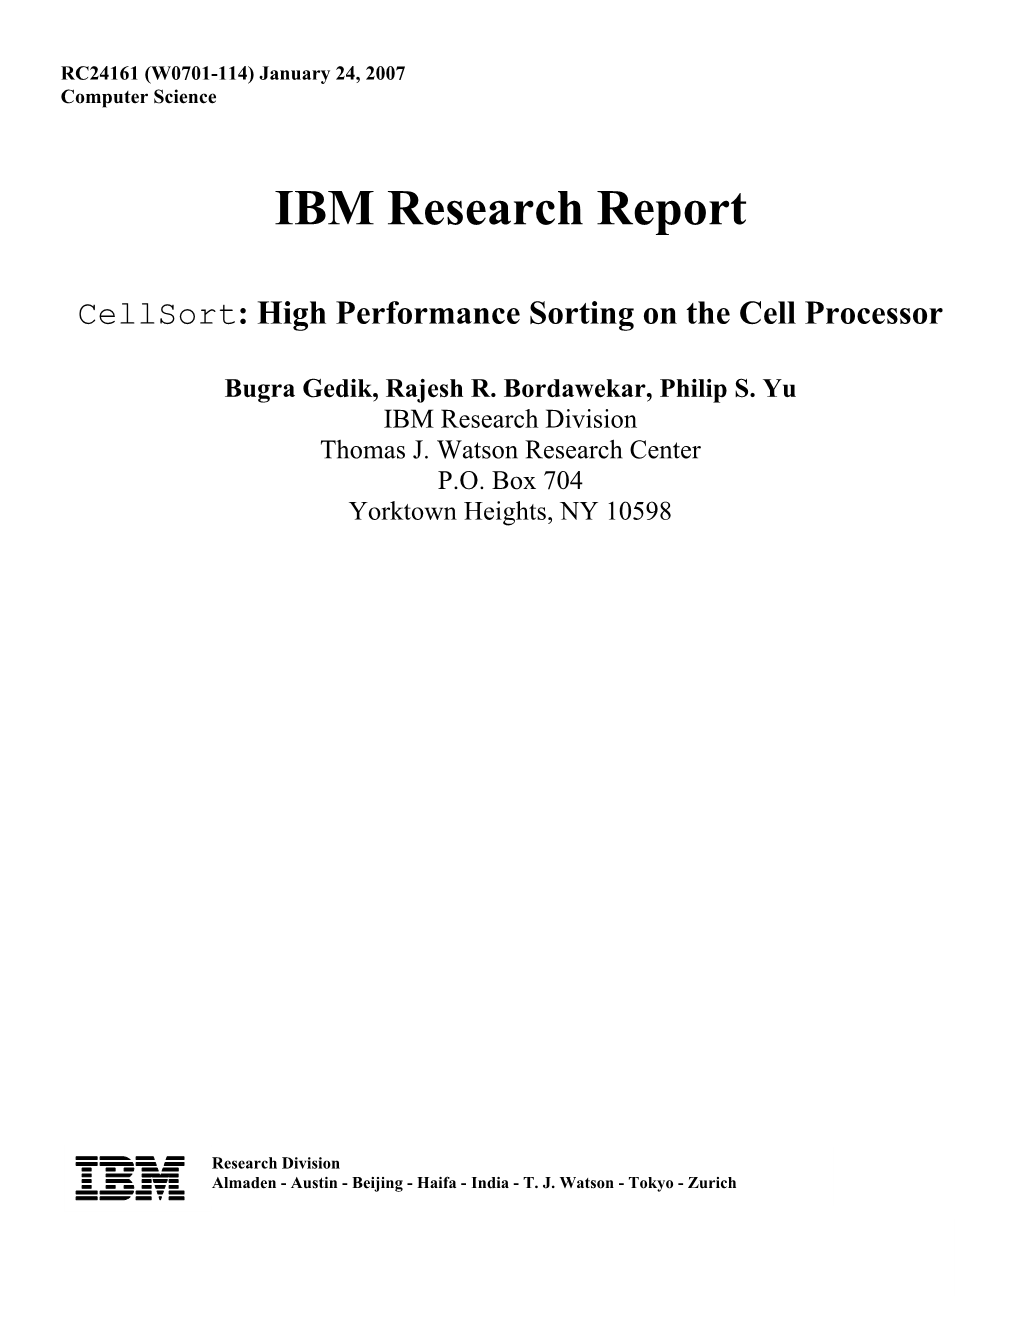 High Performance Sorting on the Cell Processor